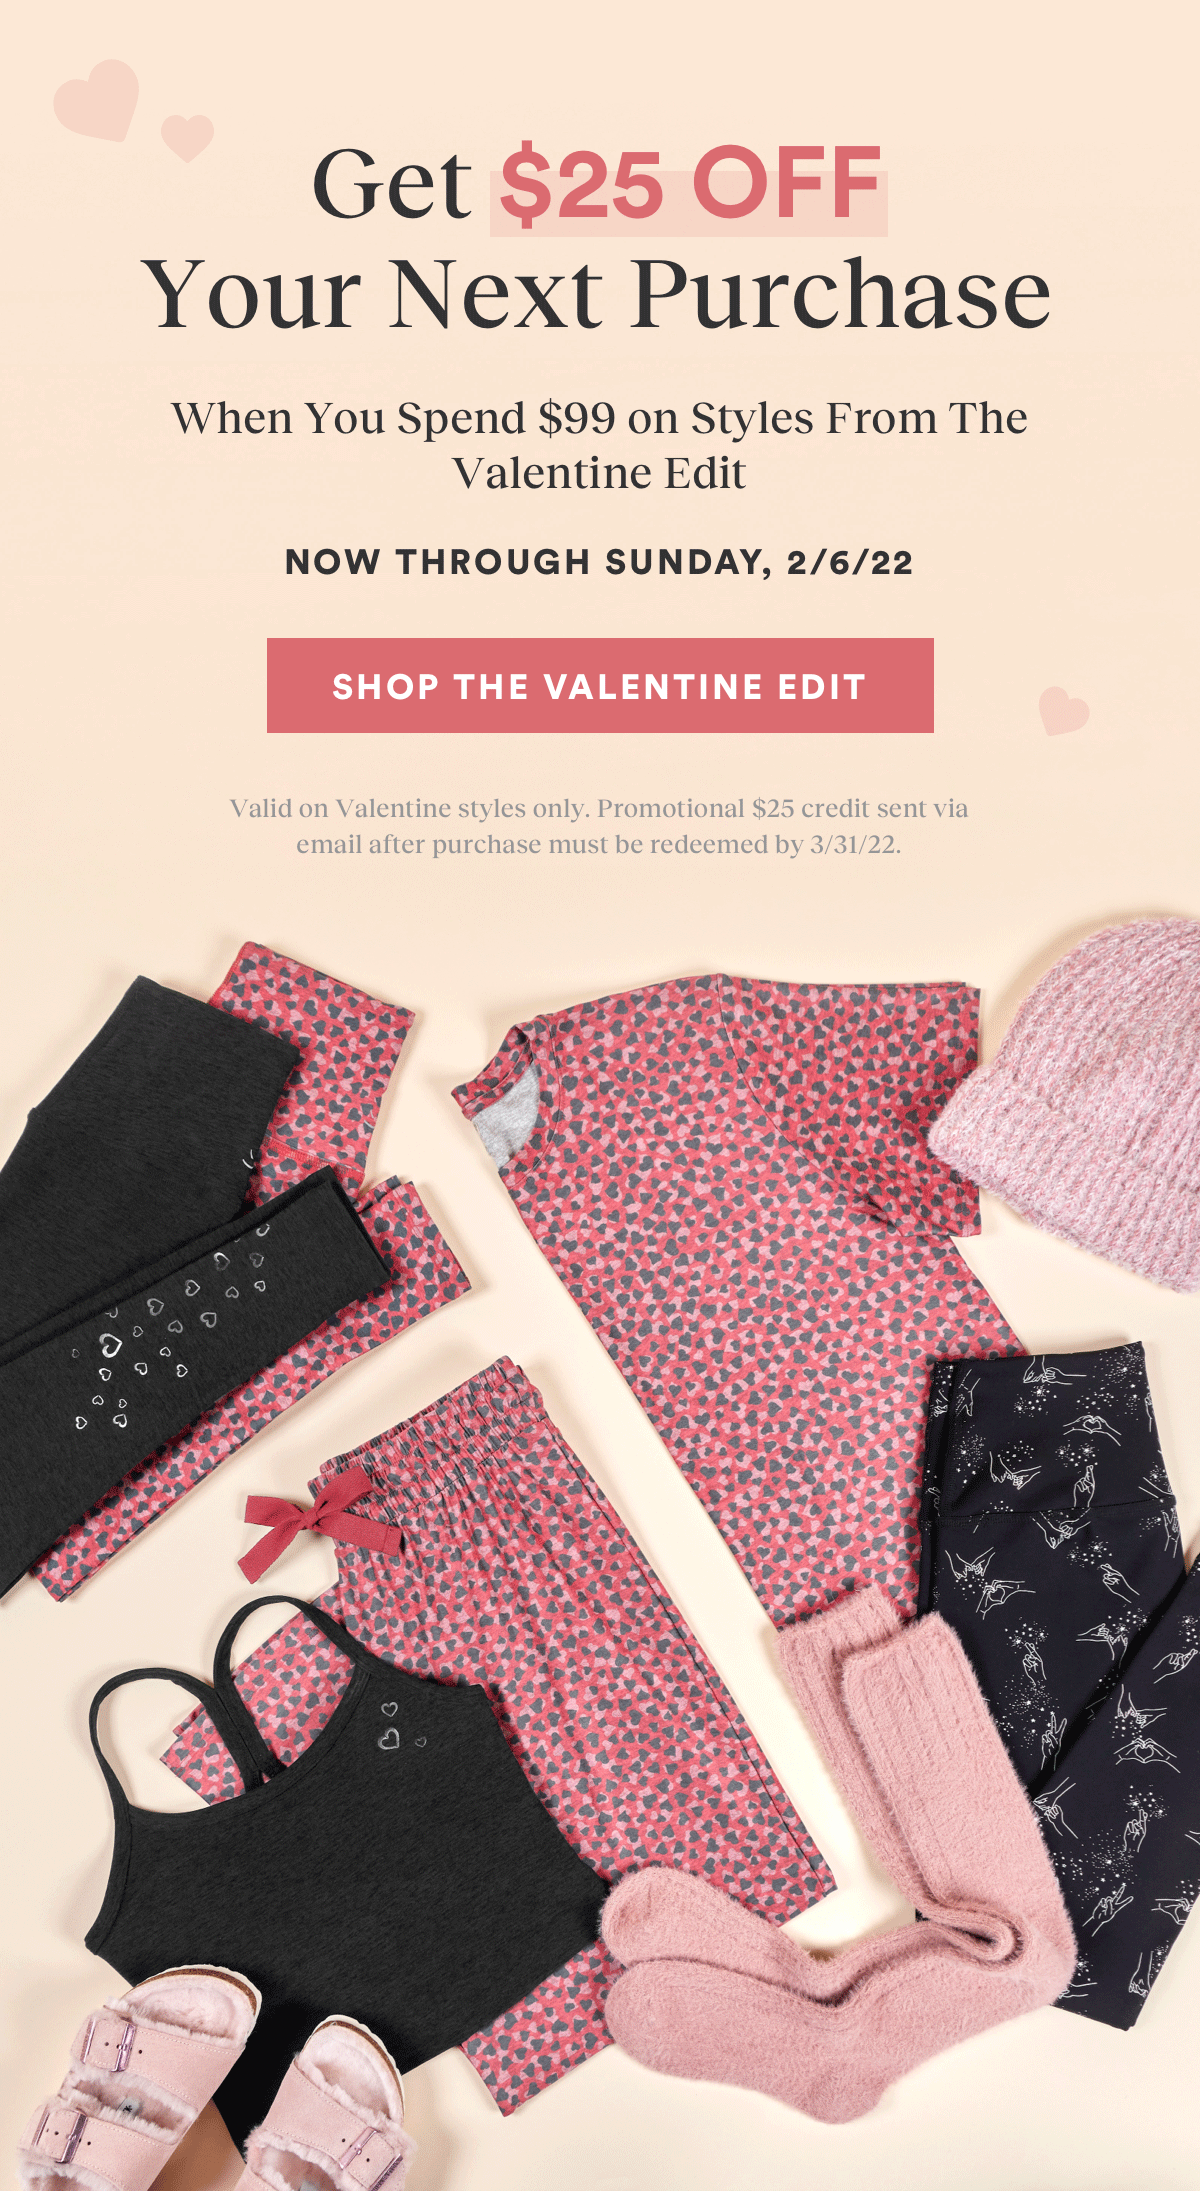 Get $25 OFF Your Next Purchase! Shop The Valentine Edit